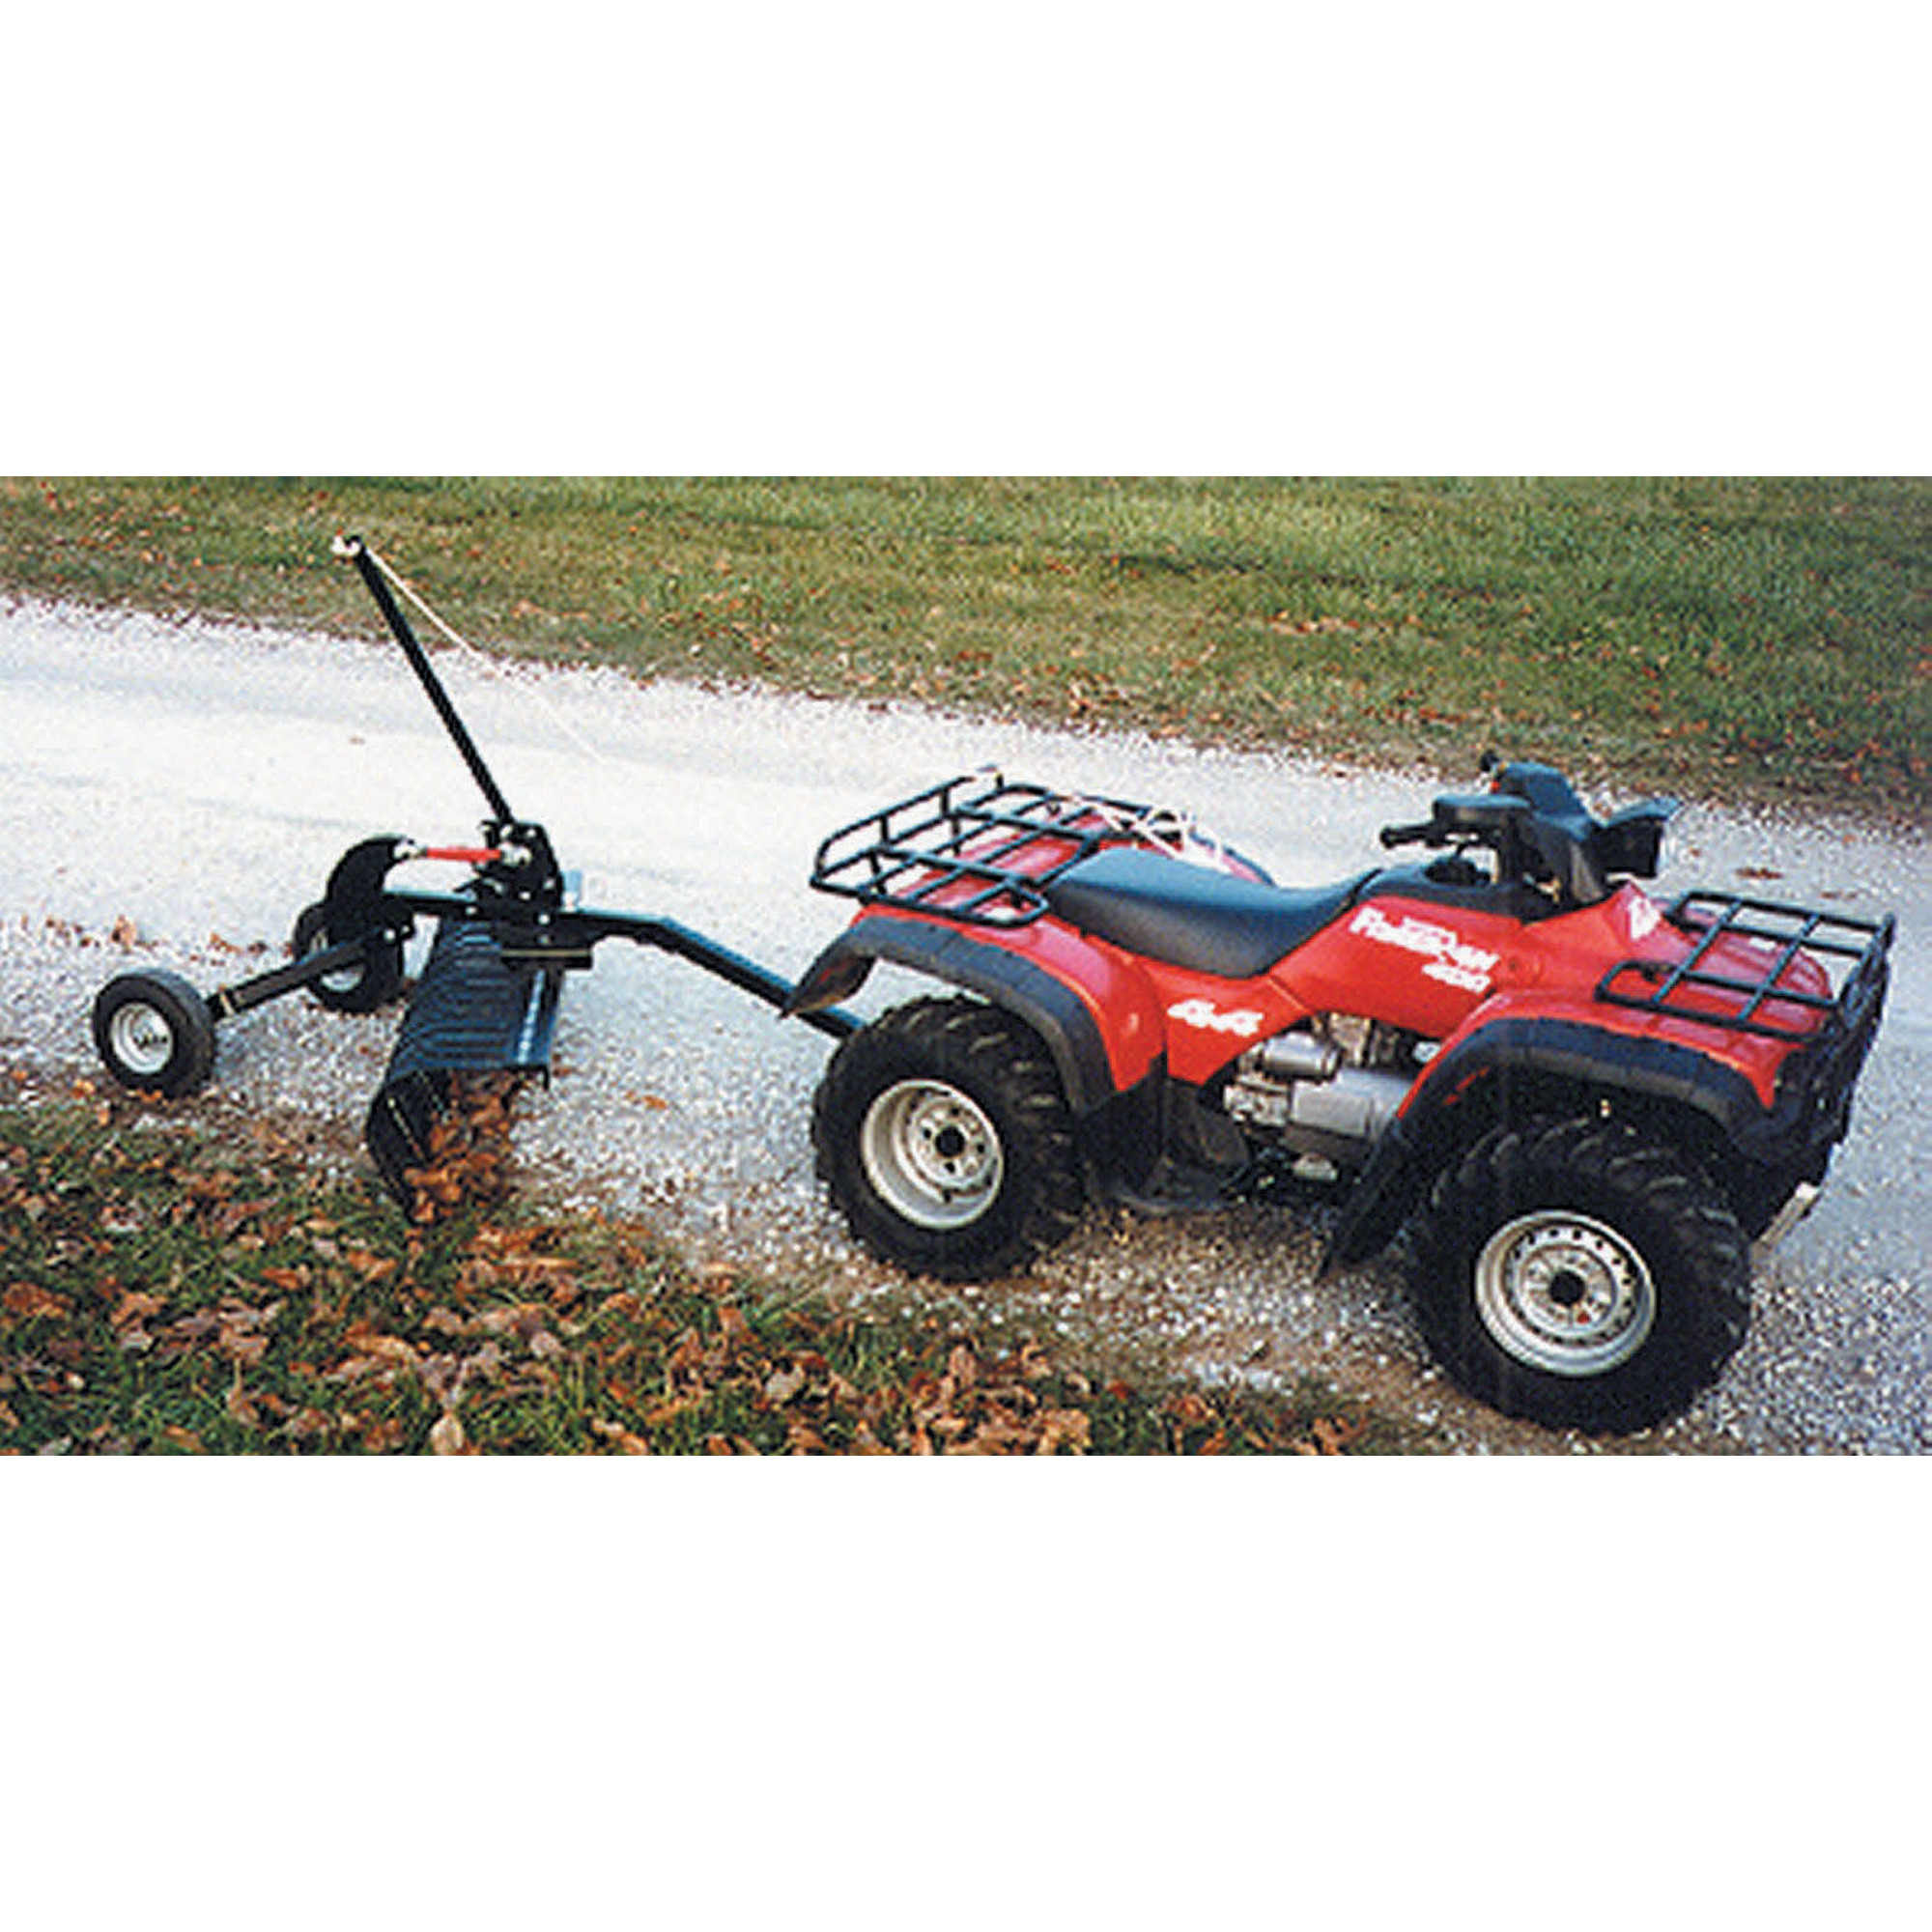 Best ideas about Landscape Rake Tractor Supply
. Save or Pin Farm Star Landscape Rake — 48in W Model Now.